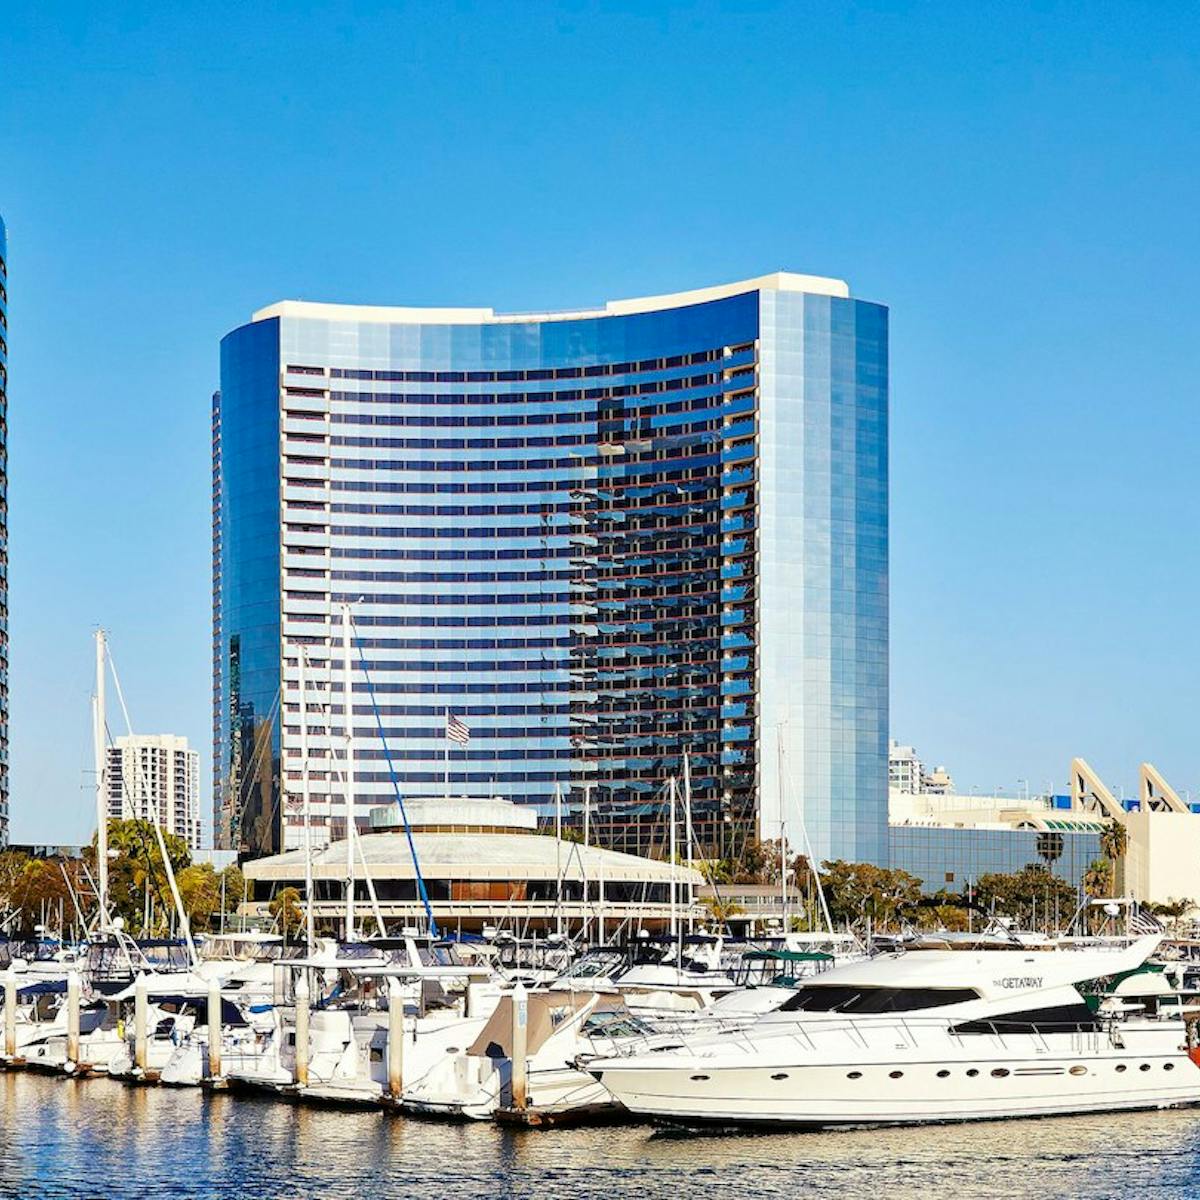 Avanti Markets has announced that their annual meeting for Operators will take place Dec. 2-4, 2019 in San Diego, CA and will feature a celebration of 10 years of micro markets as well as 10 years of Avanti Markets.